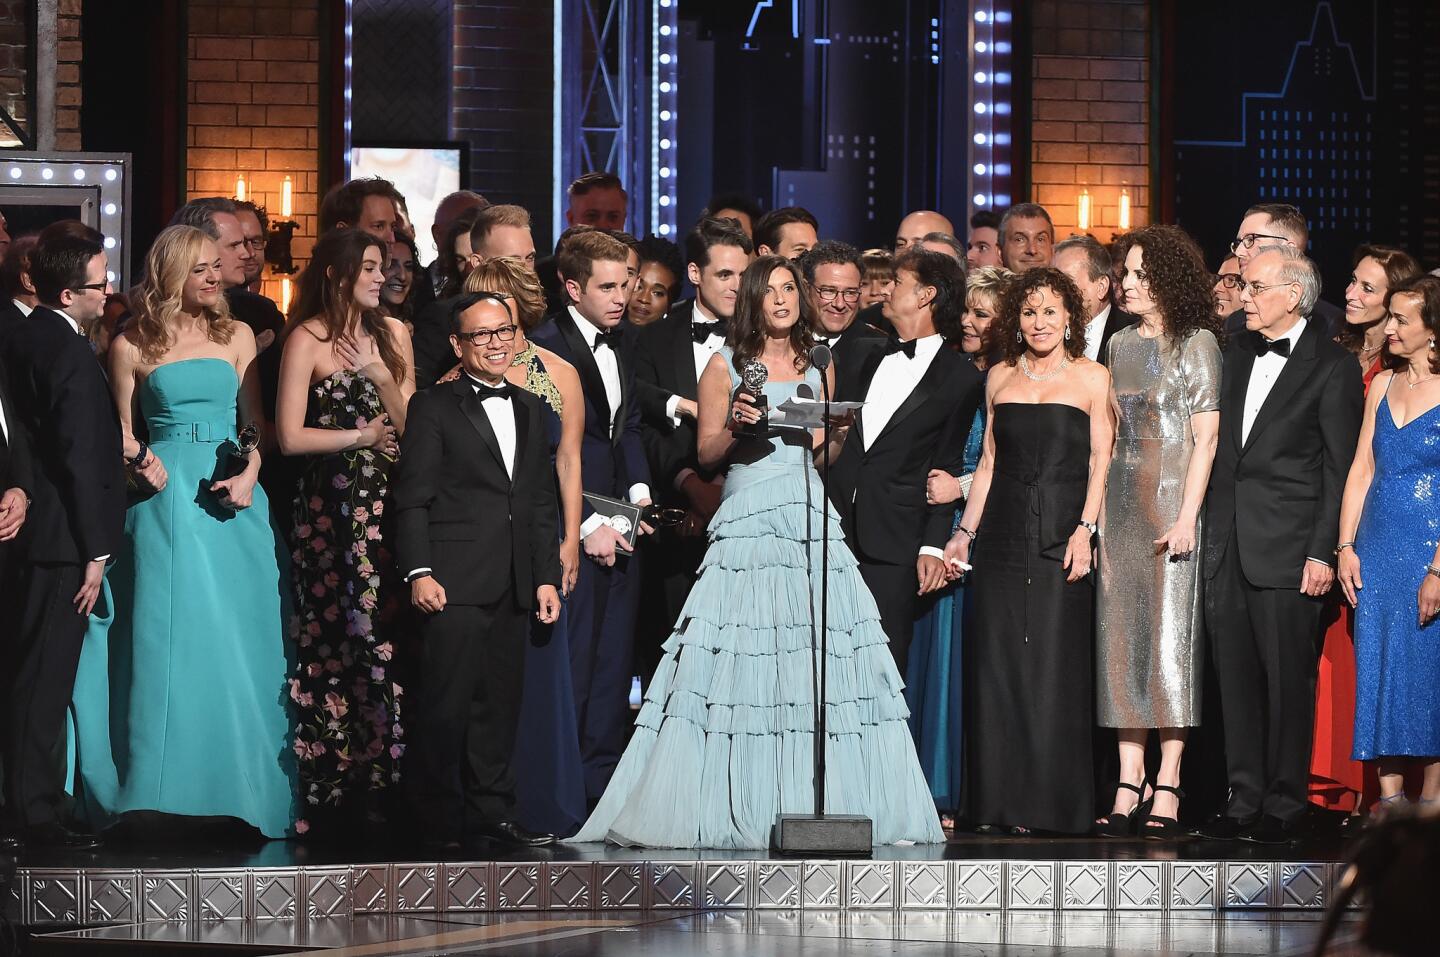 Producer Stacey Mindich, at the mike, and the cast of "Dear Evan Hansen" accept the award for best musical at the conclusion of the 2017 Tony Awards at Radio City Music Hall in New York City.